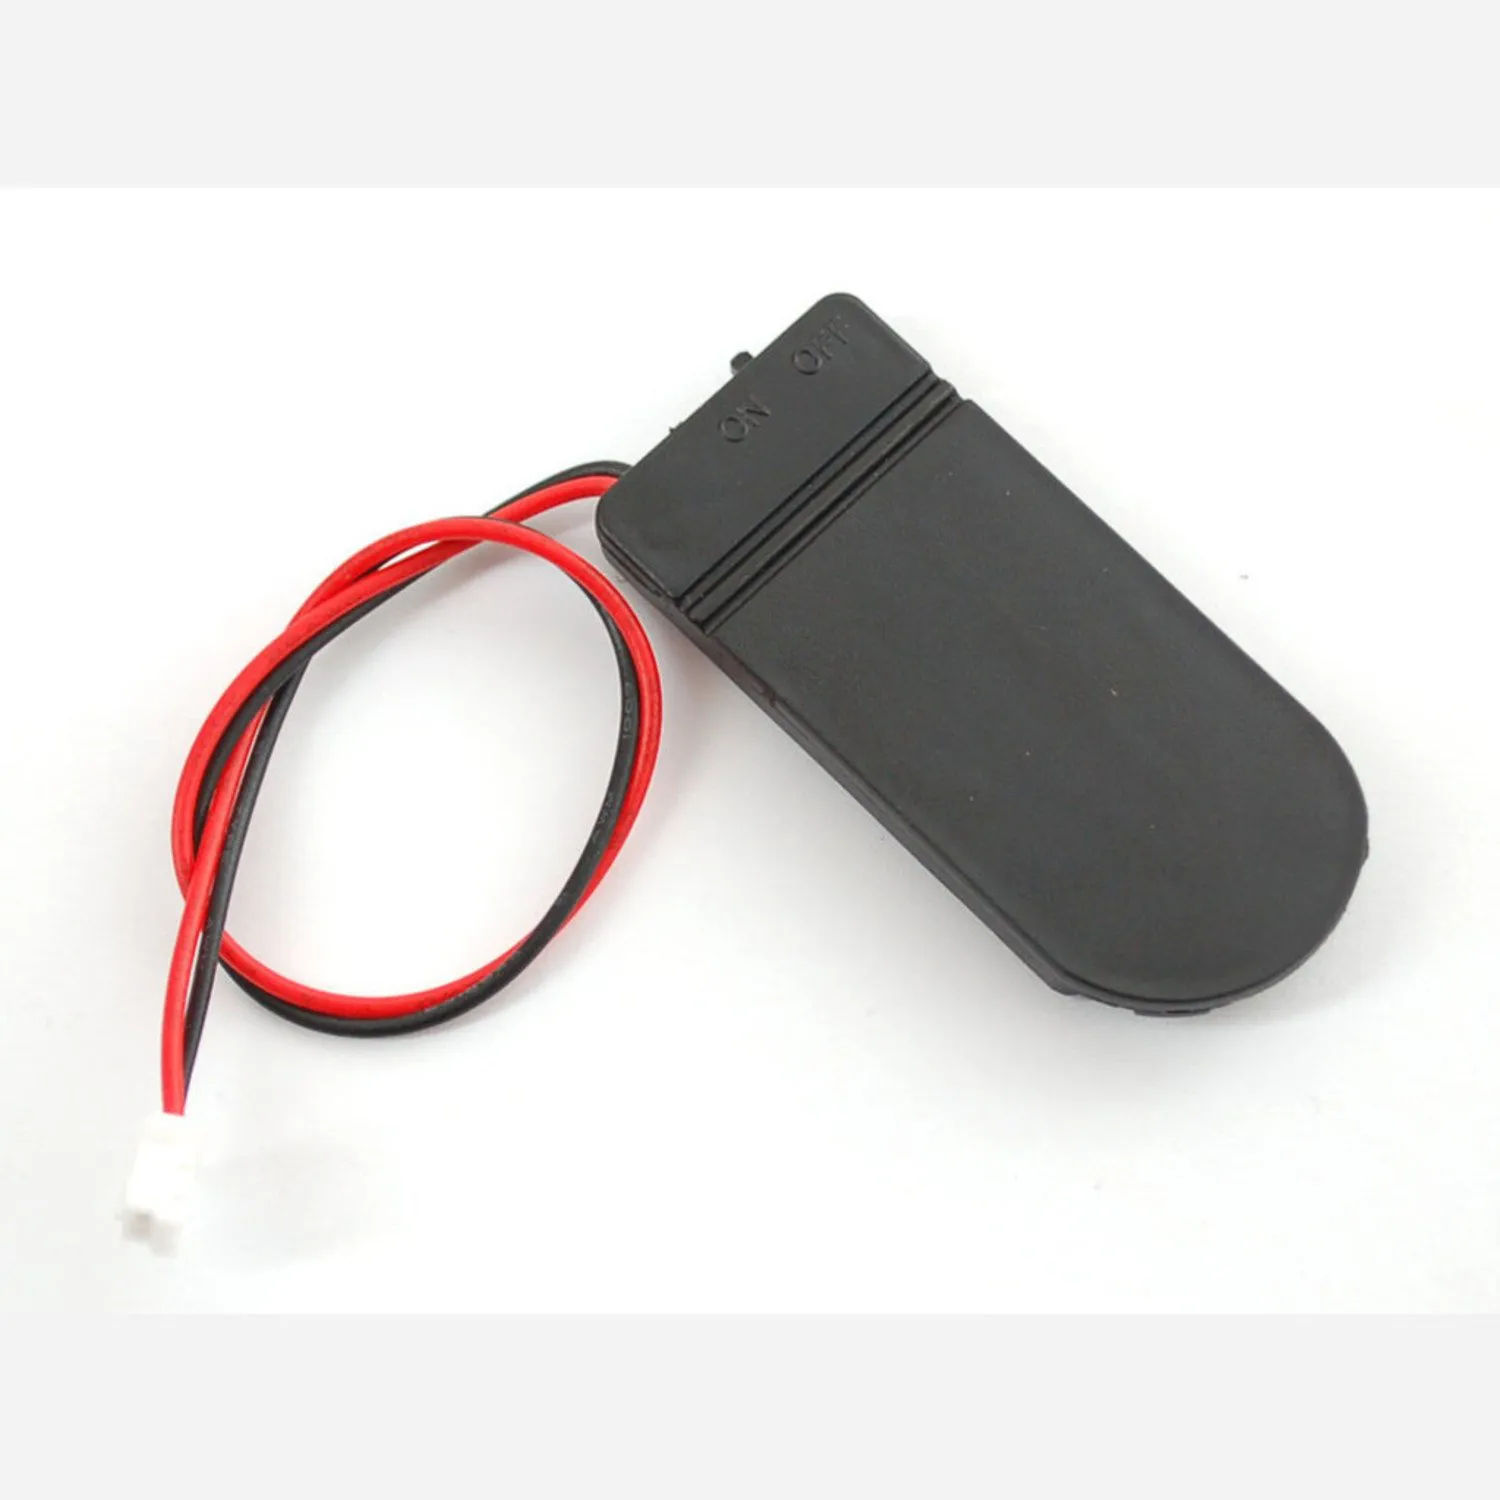 Photo of 2 x 2032 Coin Cell Battery Holder - 6V output with On/Off switch